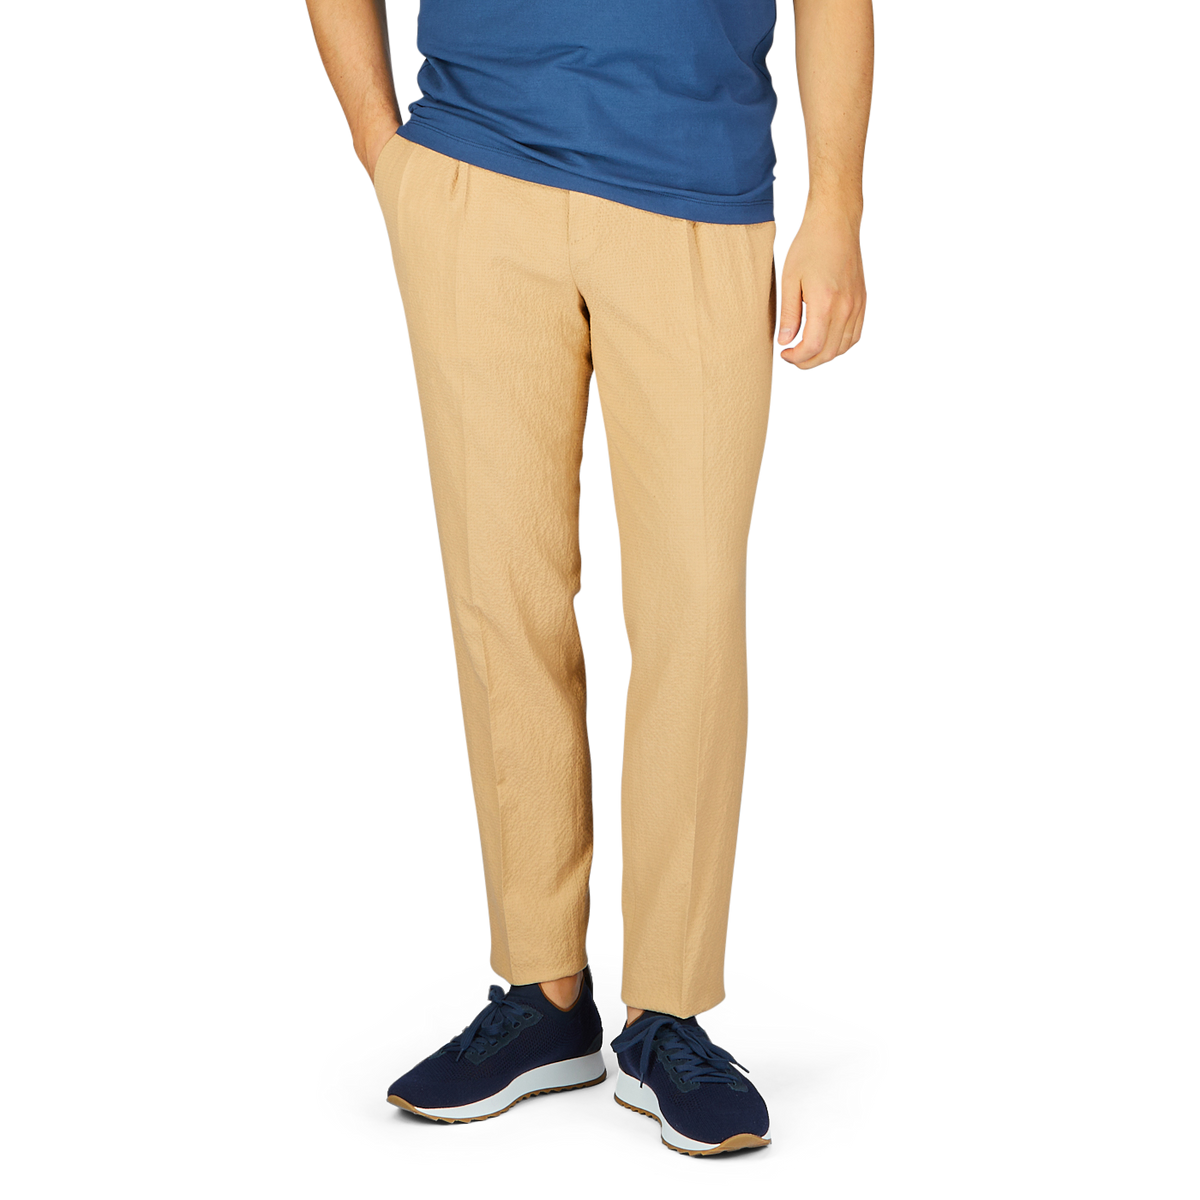 A person wearing a blue t-shirt, De Petrillo caramel cotton linen seersucker drawstring trousers, and blue sneakers, cropped at the waist.